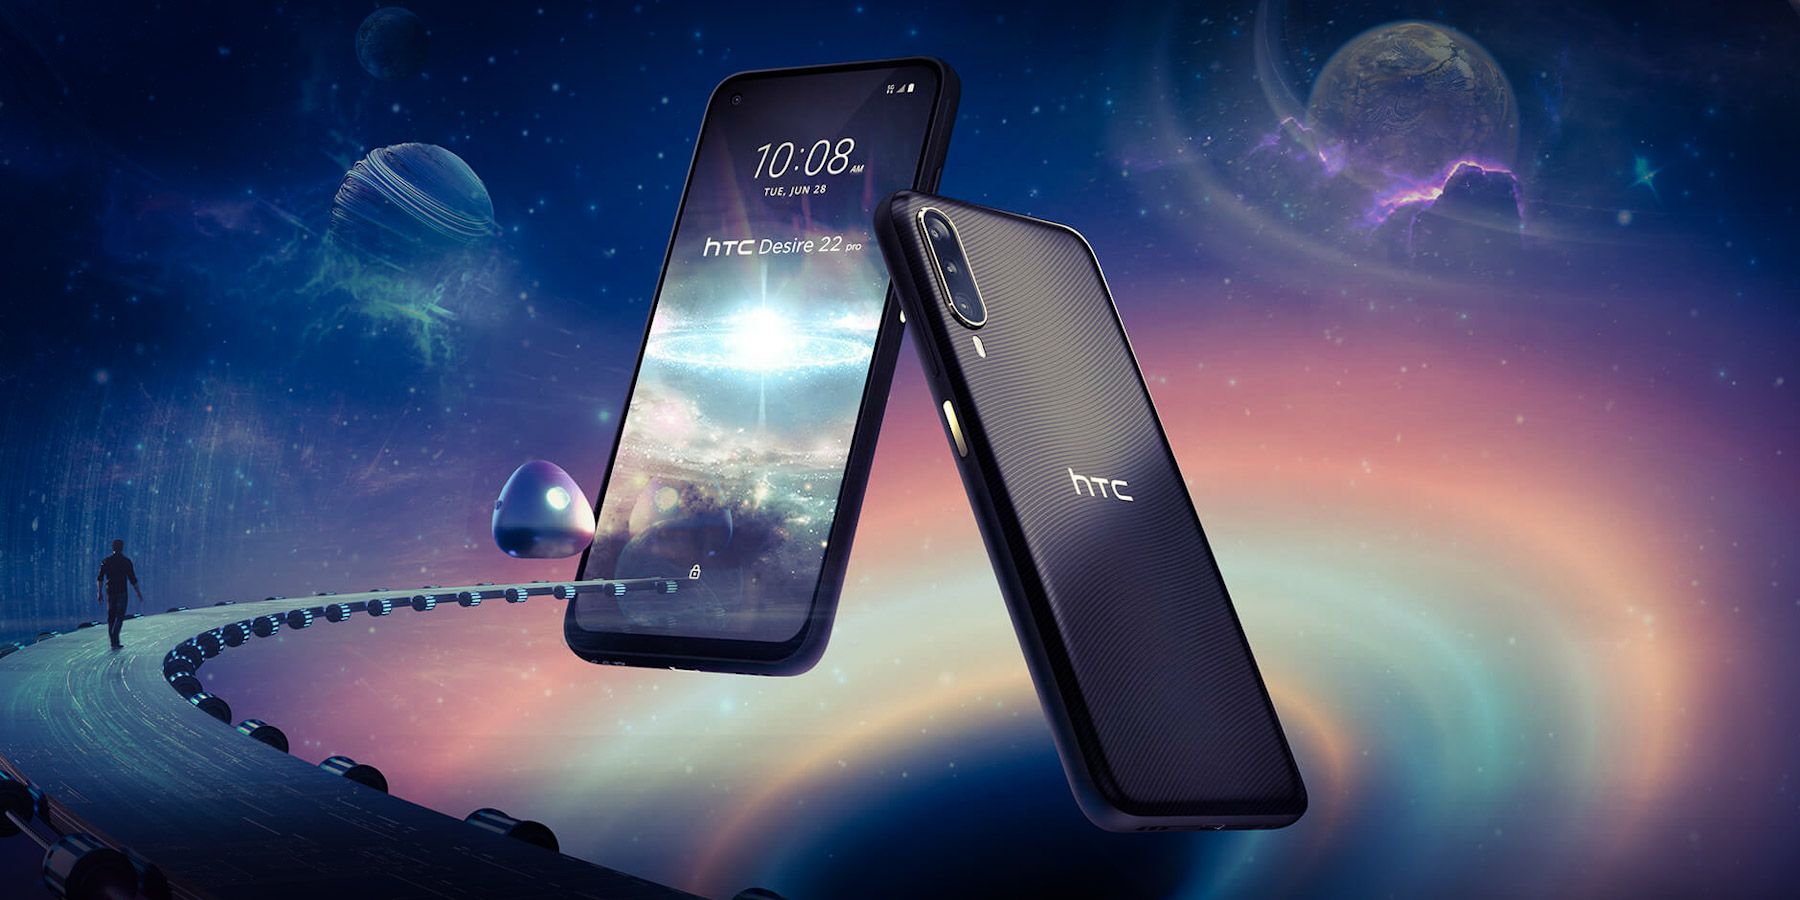 HTC Desire 22 Pro Is A Metaverse Phone That Comes With A Free Cat NFT